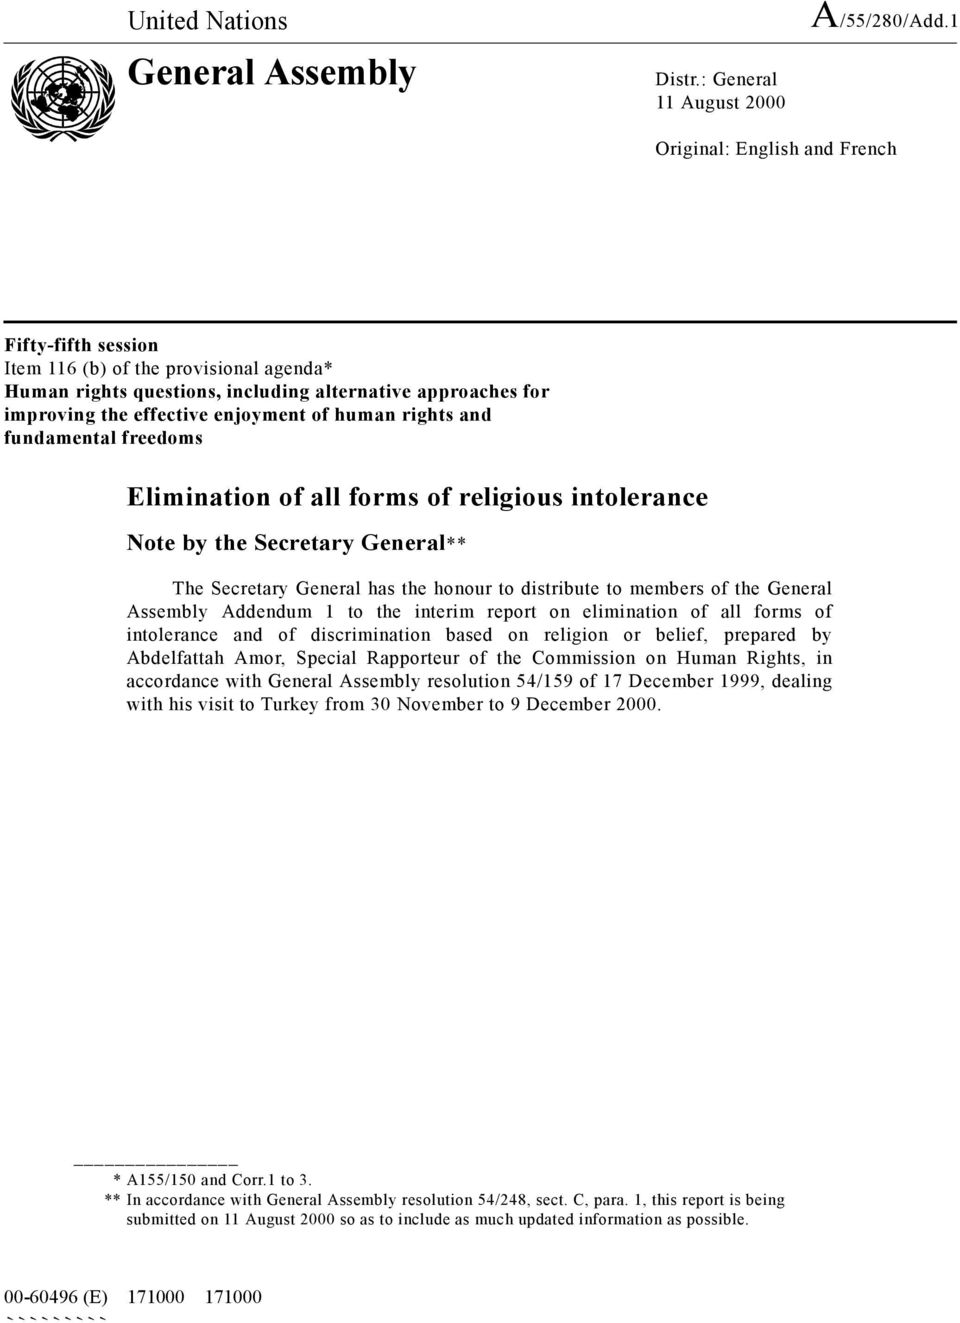 rights and fundamental freedoms Elimination of all forms of religious intolerance Note by the Secretary General** The Secretary General has the honour to distribute to members of the General Assembly